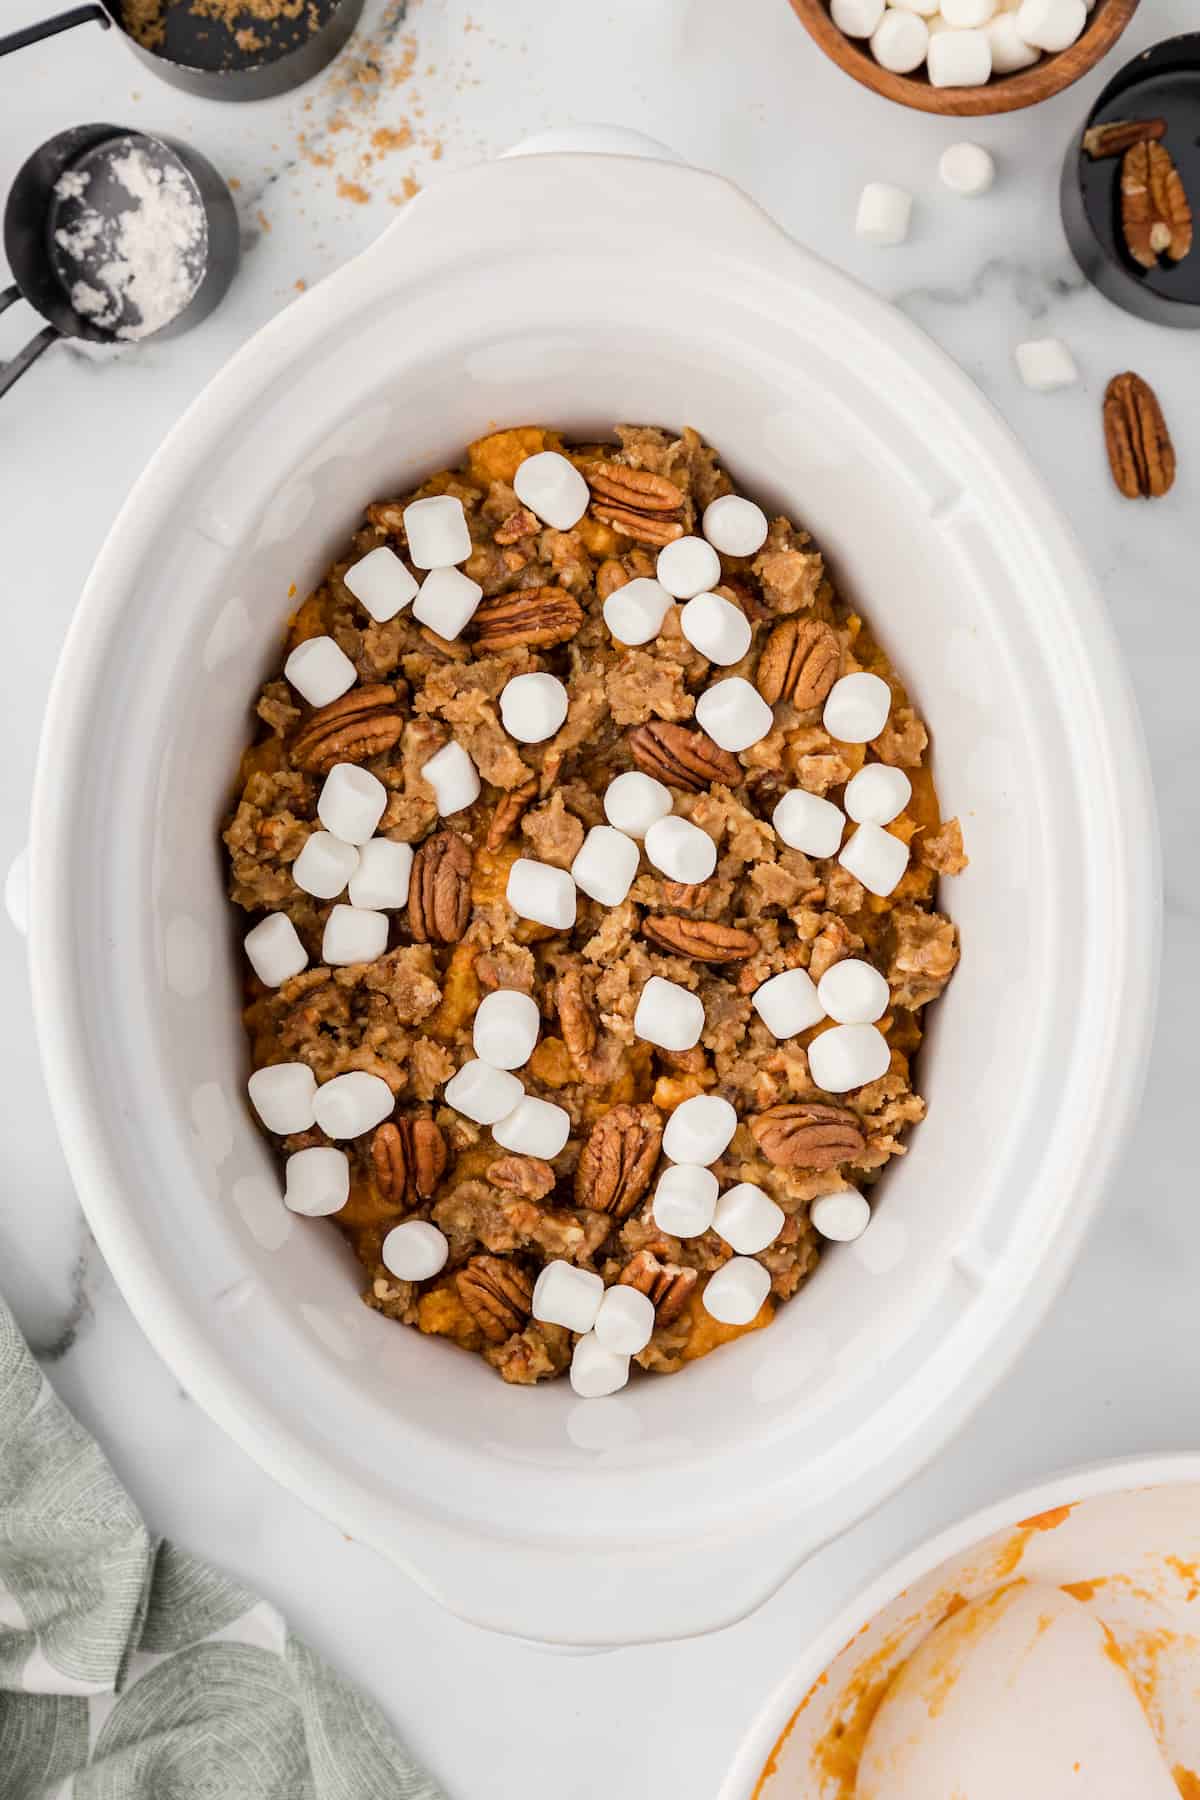 add marshmallows to the sweet potatoes in the crockpot